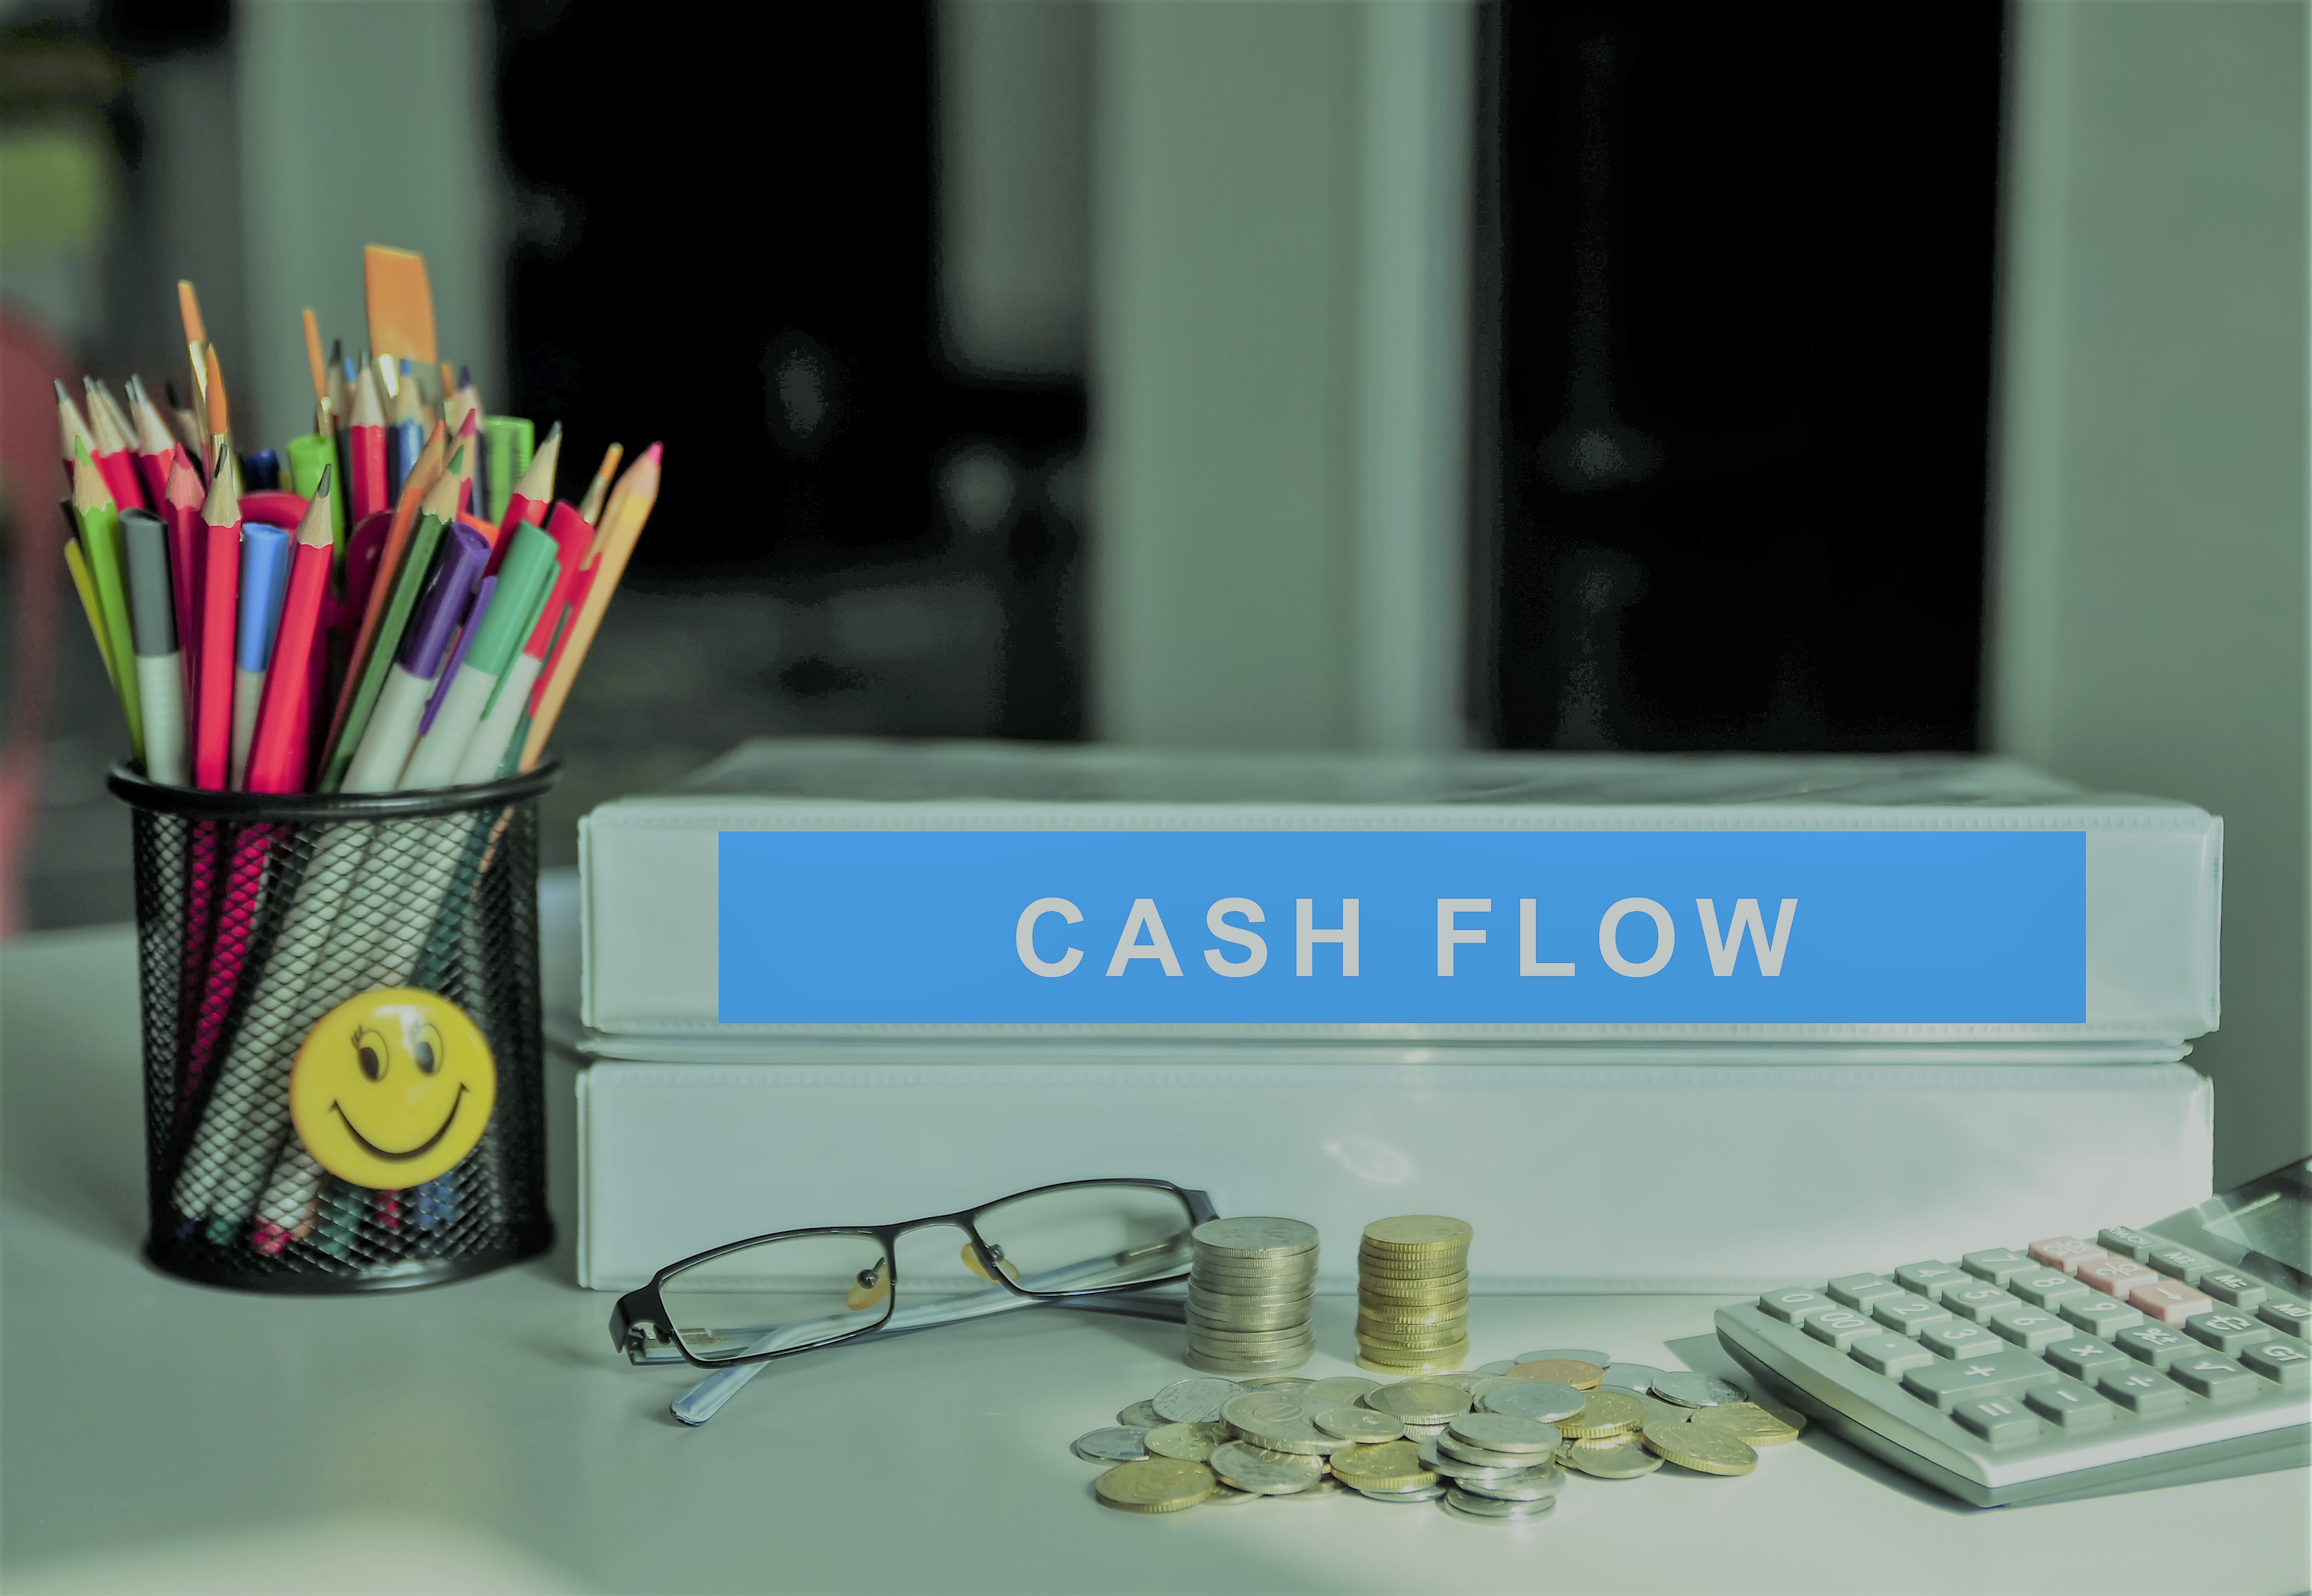 Switched On Property Investors Always Know Their Cash Flow Position